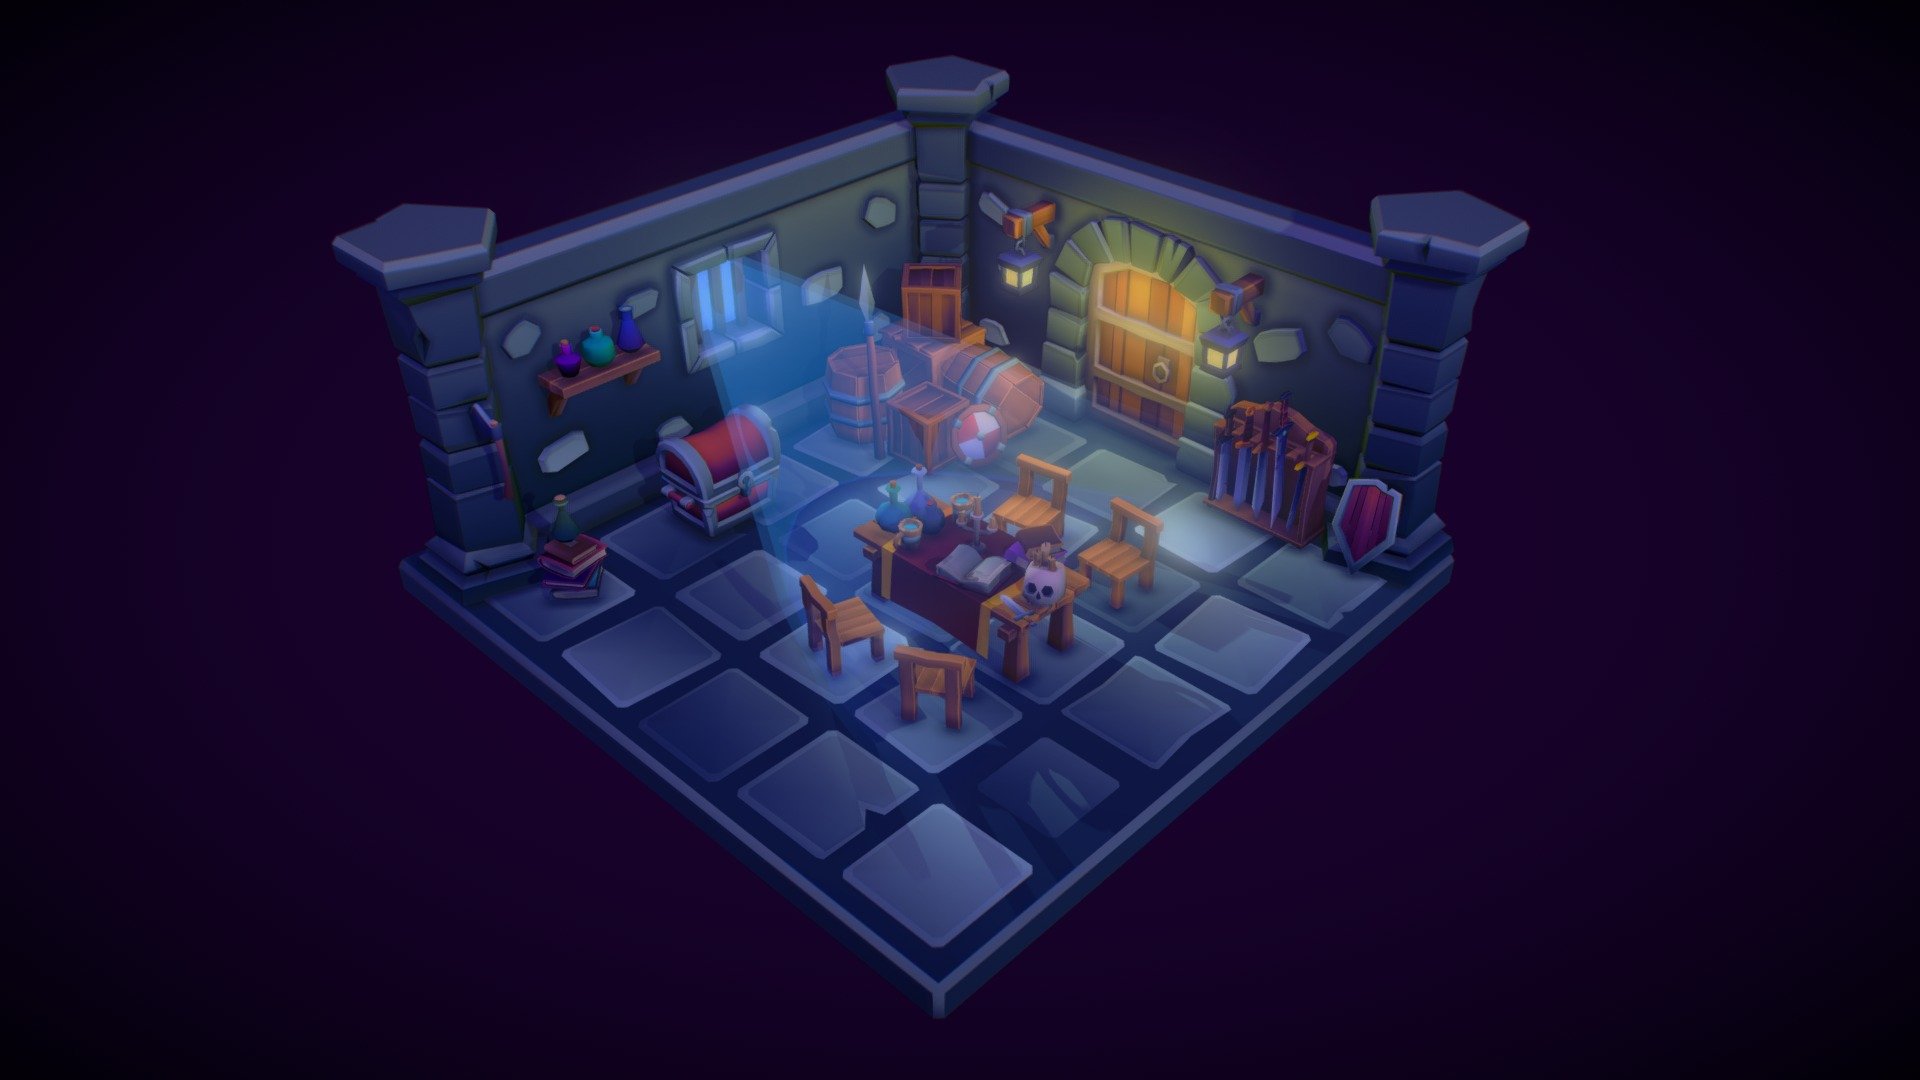 Stylized low-poly scene of a fantasy dungeon made with Blender and Photoshop. Textured with lazy unwrapping and gradient textures technique.

Check out my Arstation for a Unity version with real volumetric lights and particles: https://www.artstation.com/artwork/gJ1PRe

I will be grateful for your feedback, don’t forget to like it. Thanks! - Fantasy Dungeon - 3D model by HalfAsleepArtist 3d model